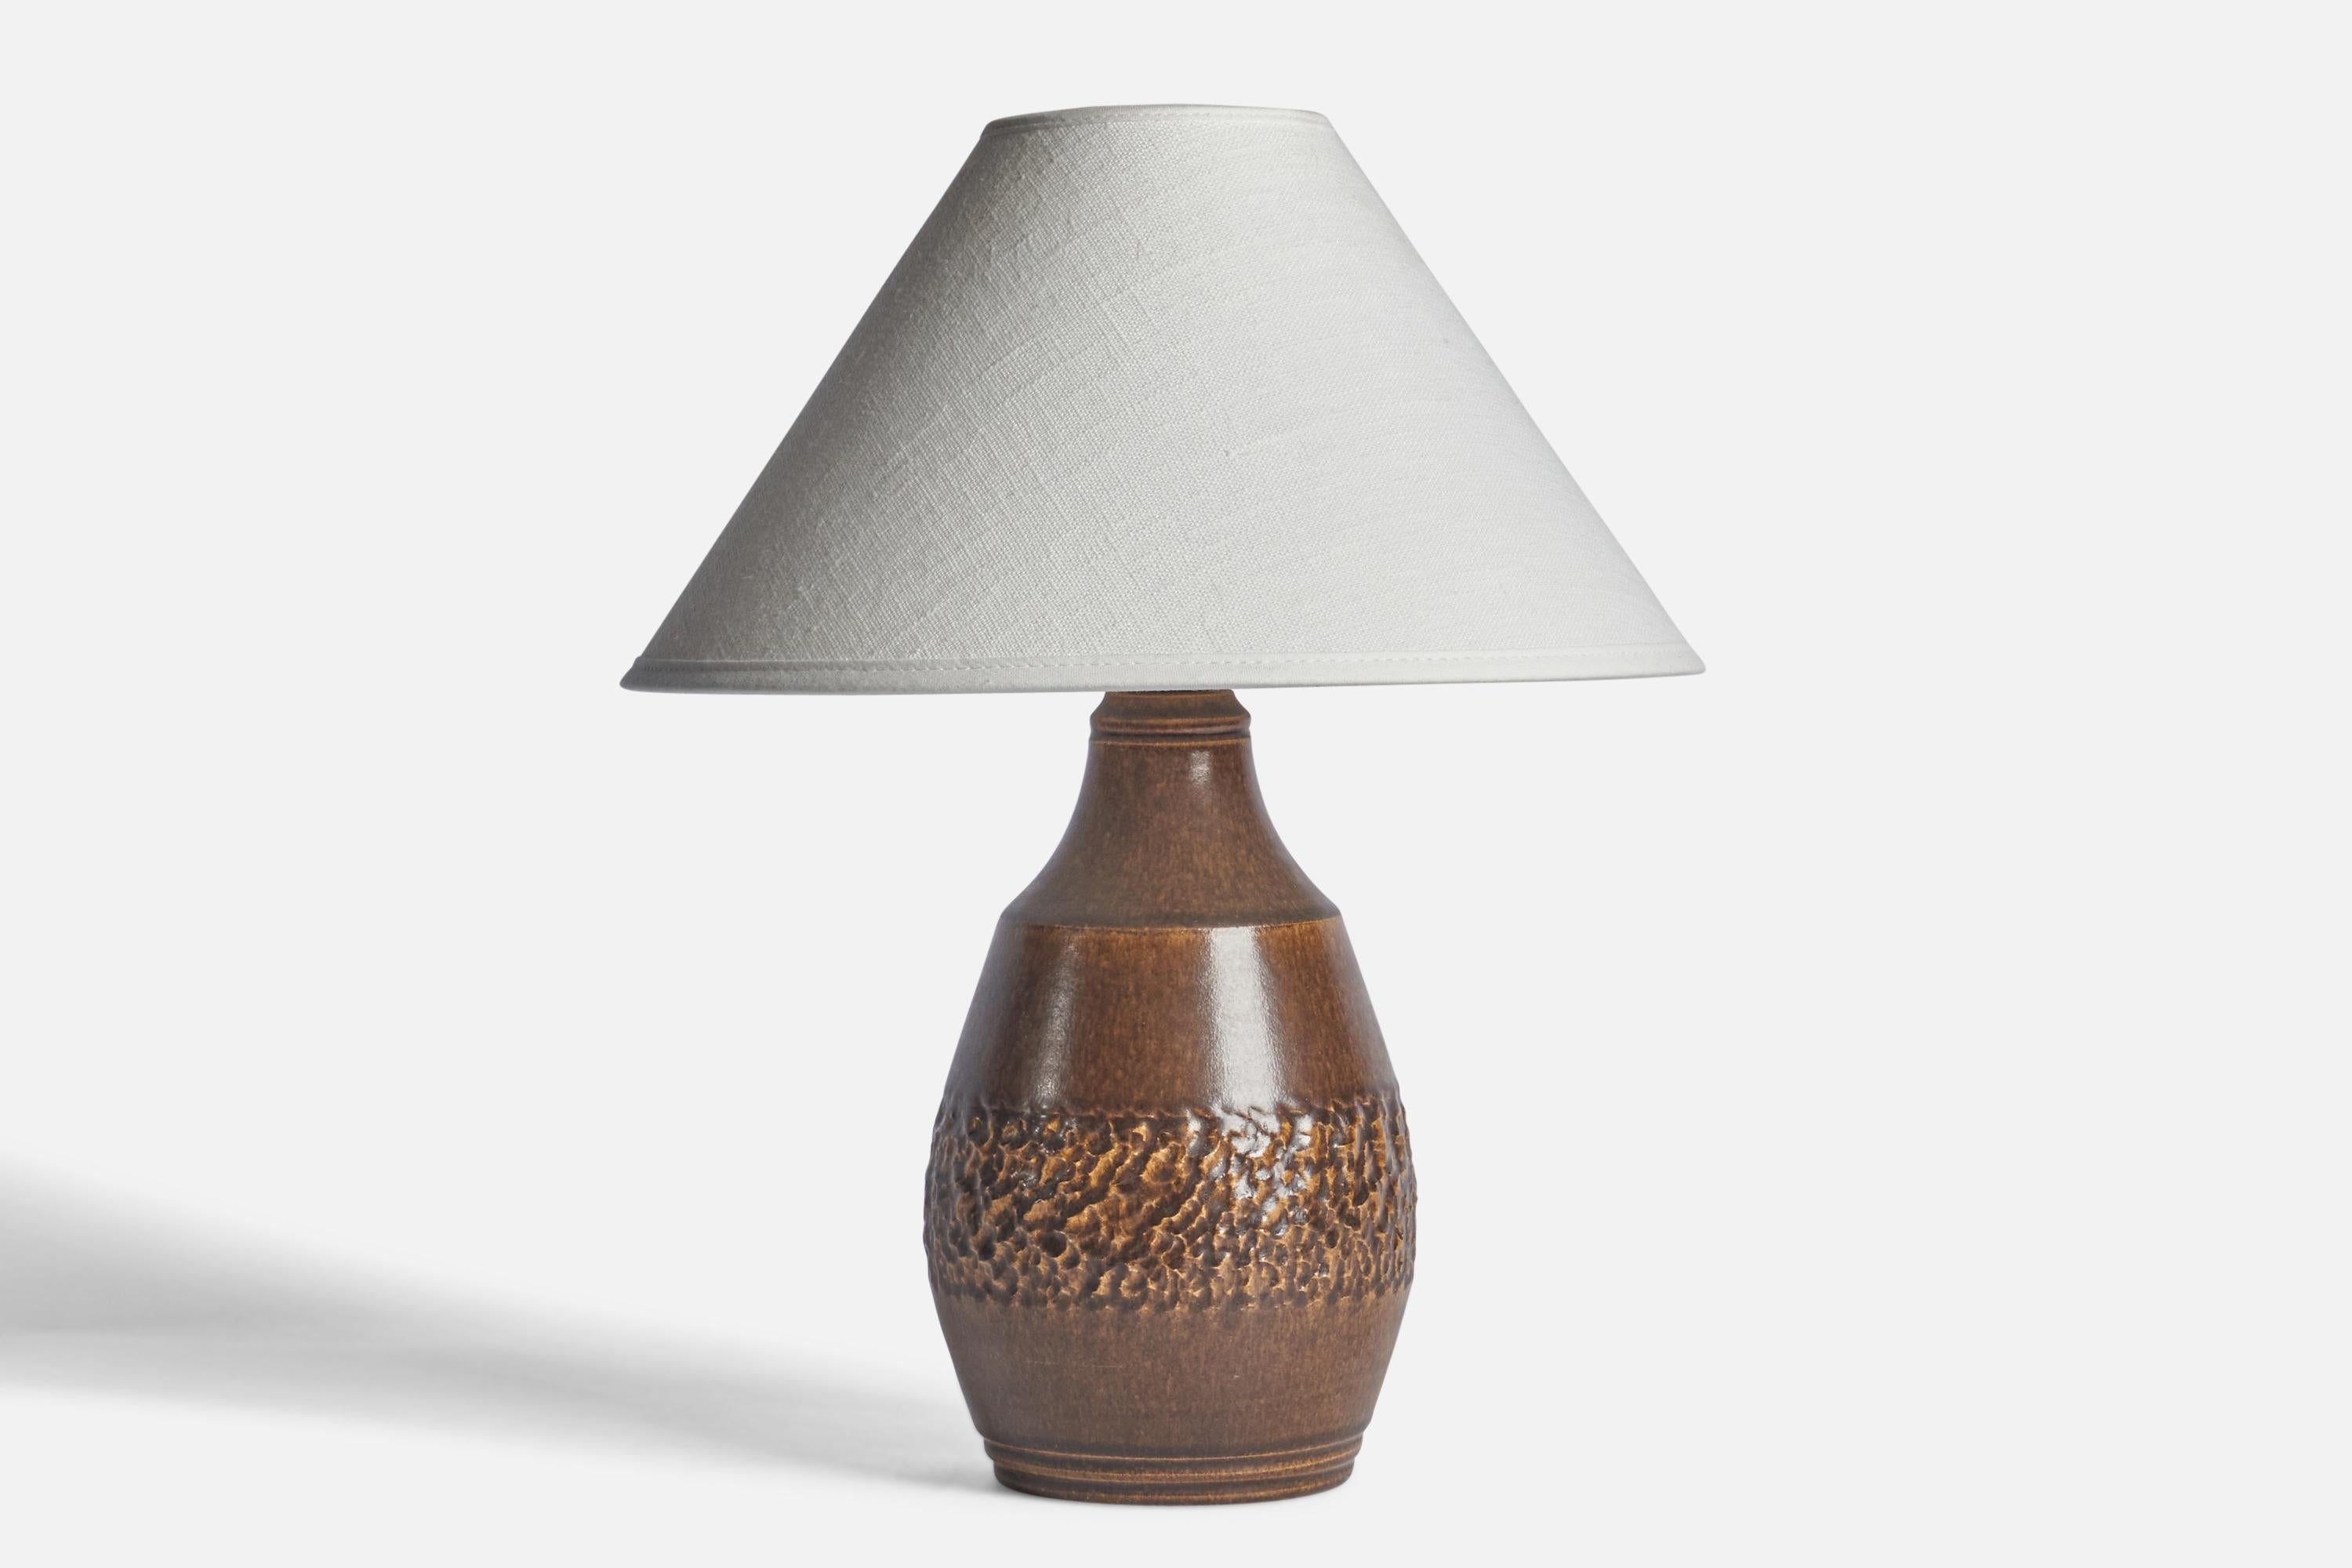 A brown-glazed and incised stoneware table lamp designed and produced by Henry Brandi, Sweden, c. 1960s.

Dimensions of Lamp (inches): 9.75